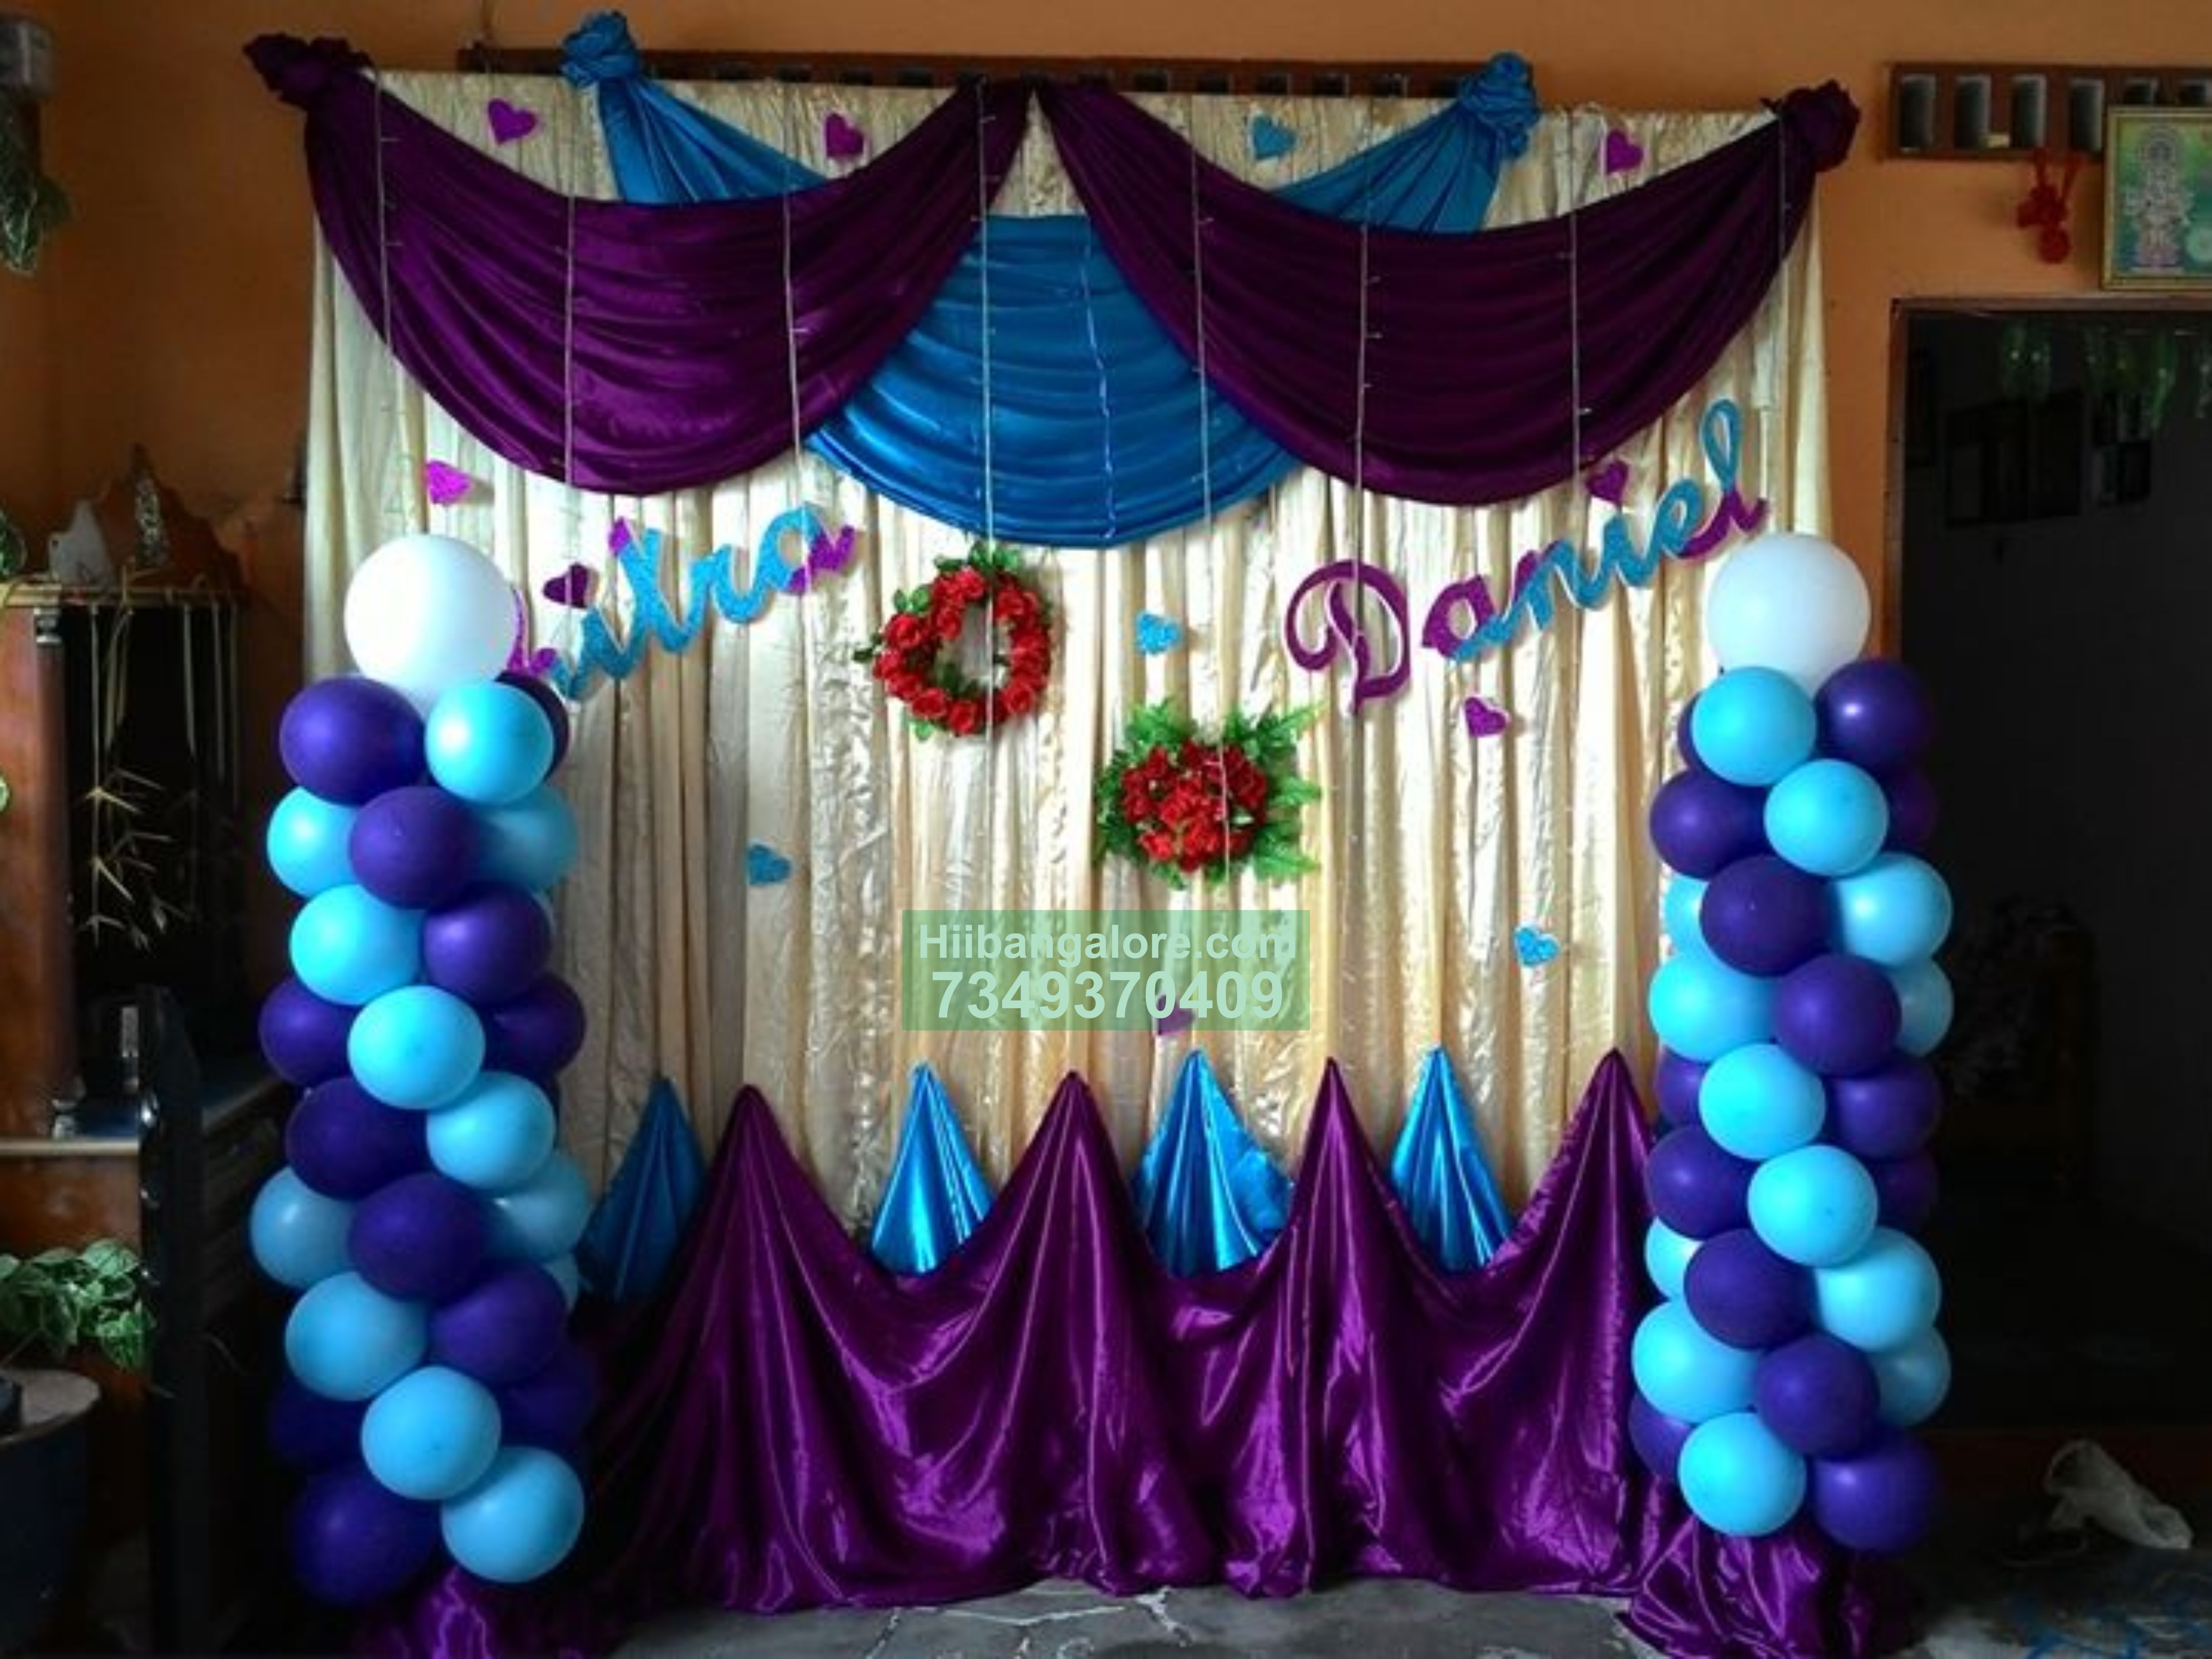 home engagement decorations - Catering services Bangalore, Best ...